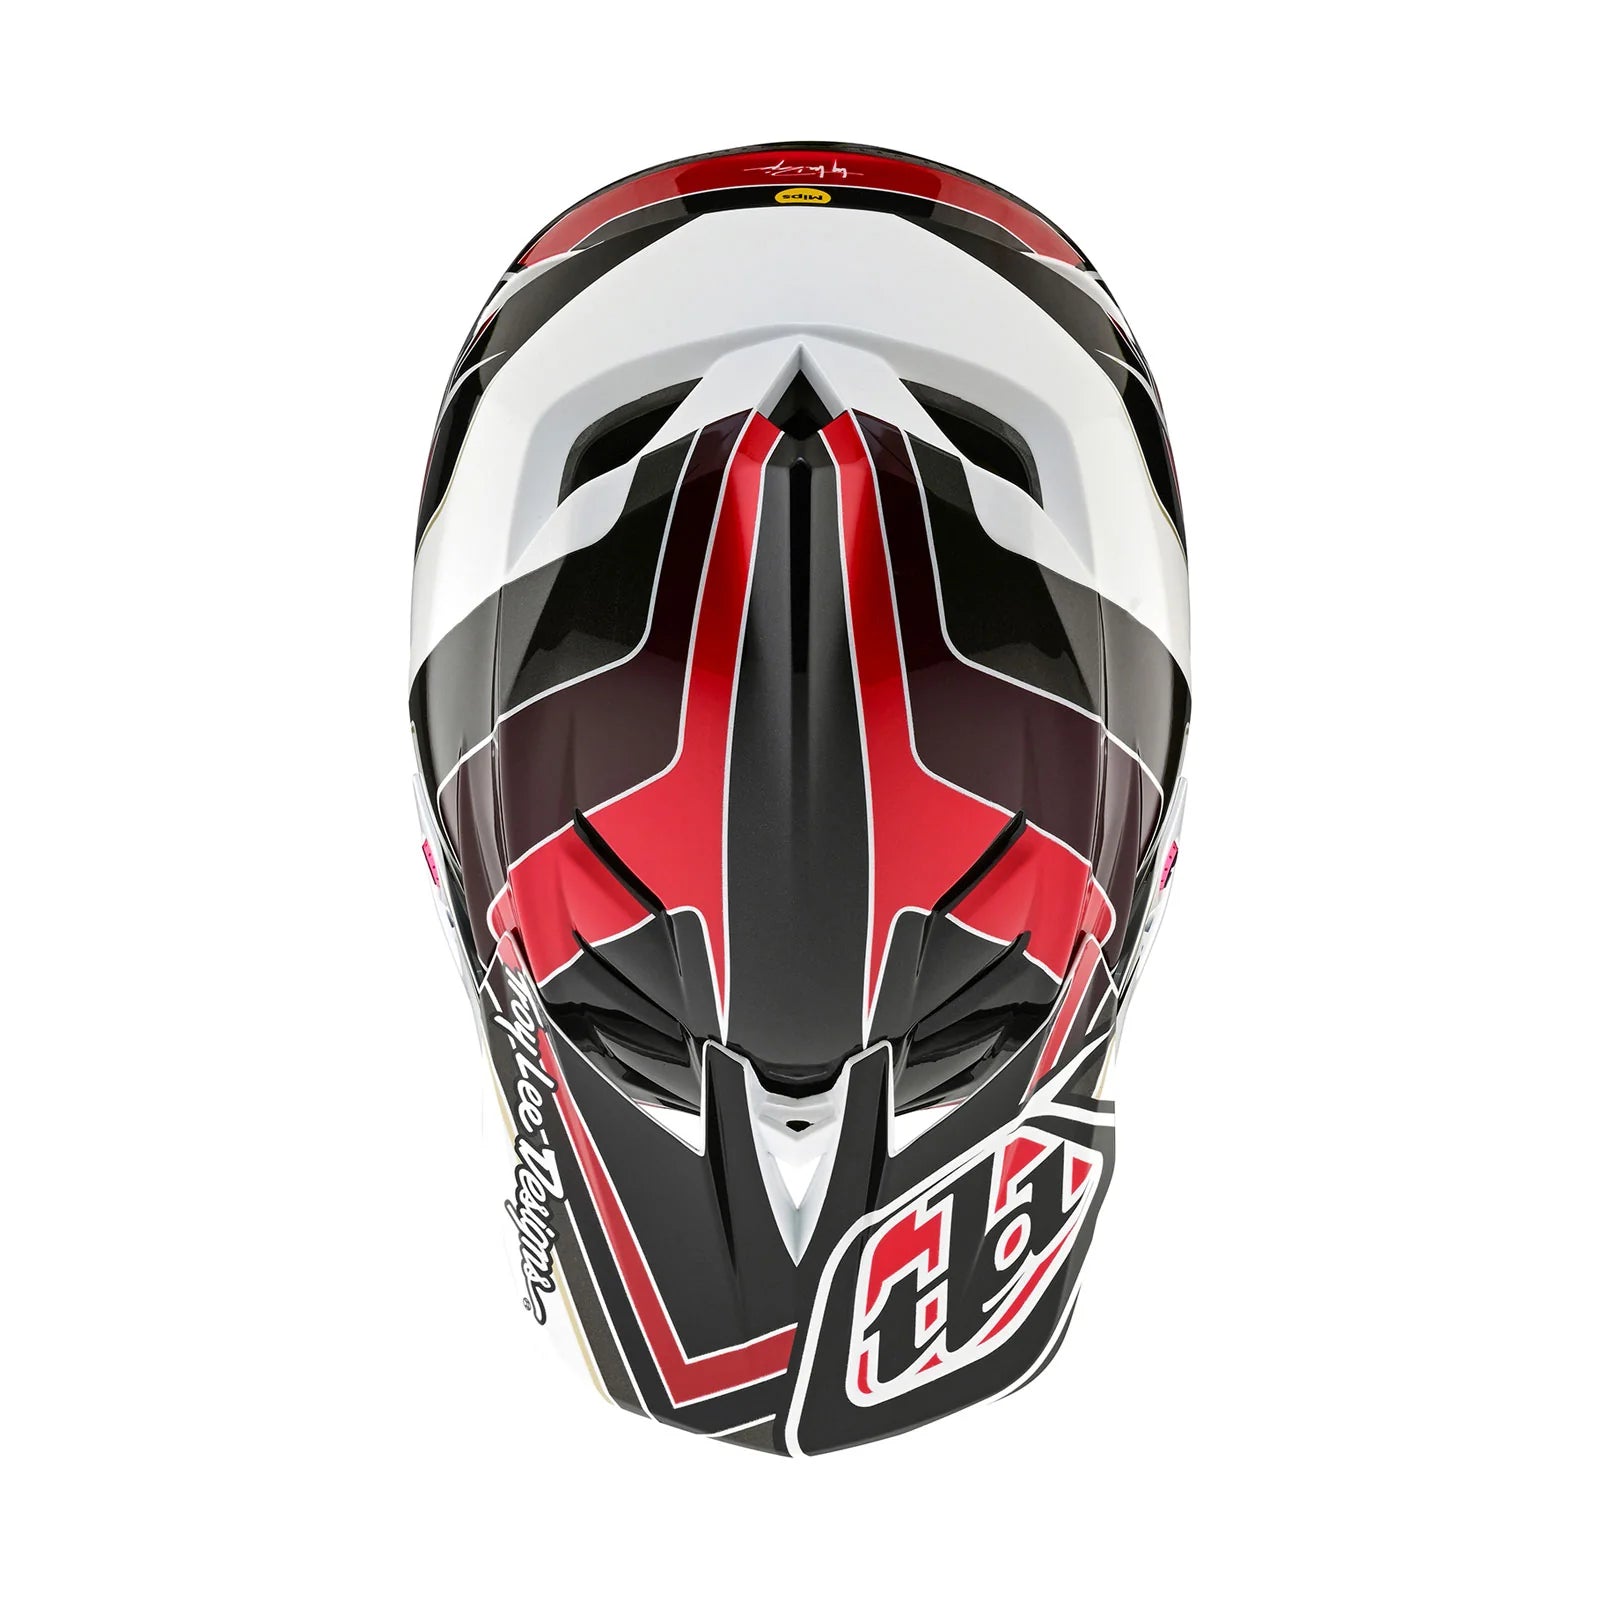 A TLD D4 AS Polyacrylite Helmet W/MIPS Block Charcoal / Red safety helmet with a red, white, and black design.